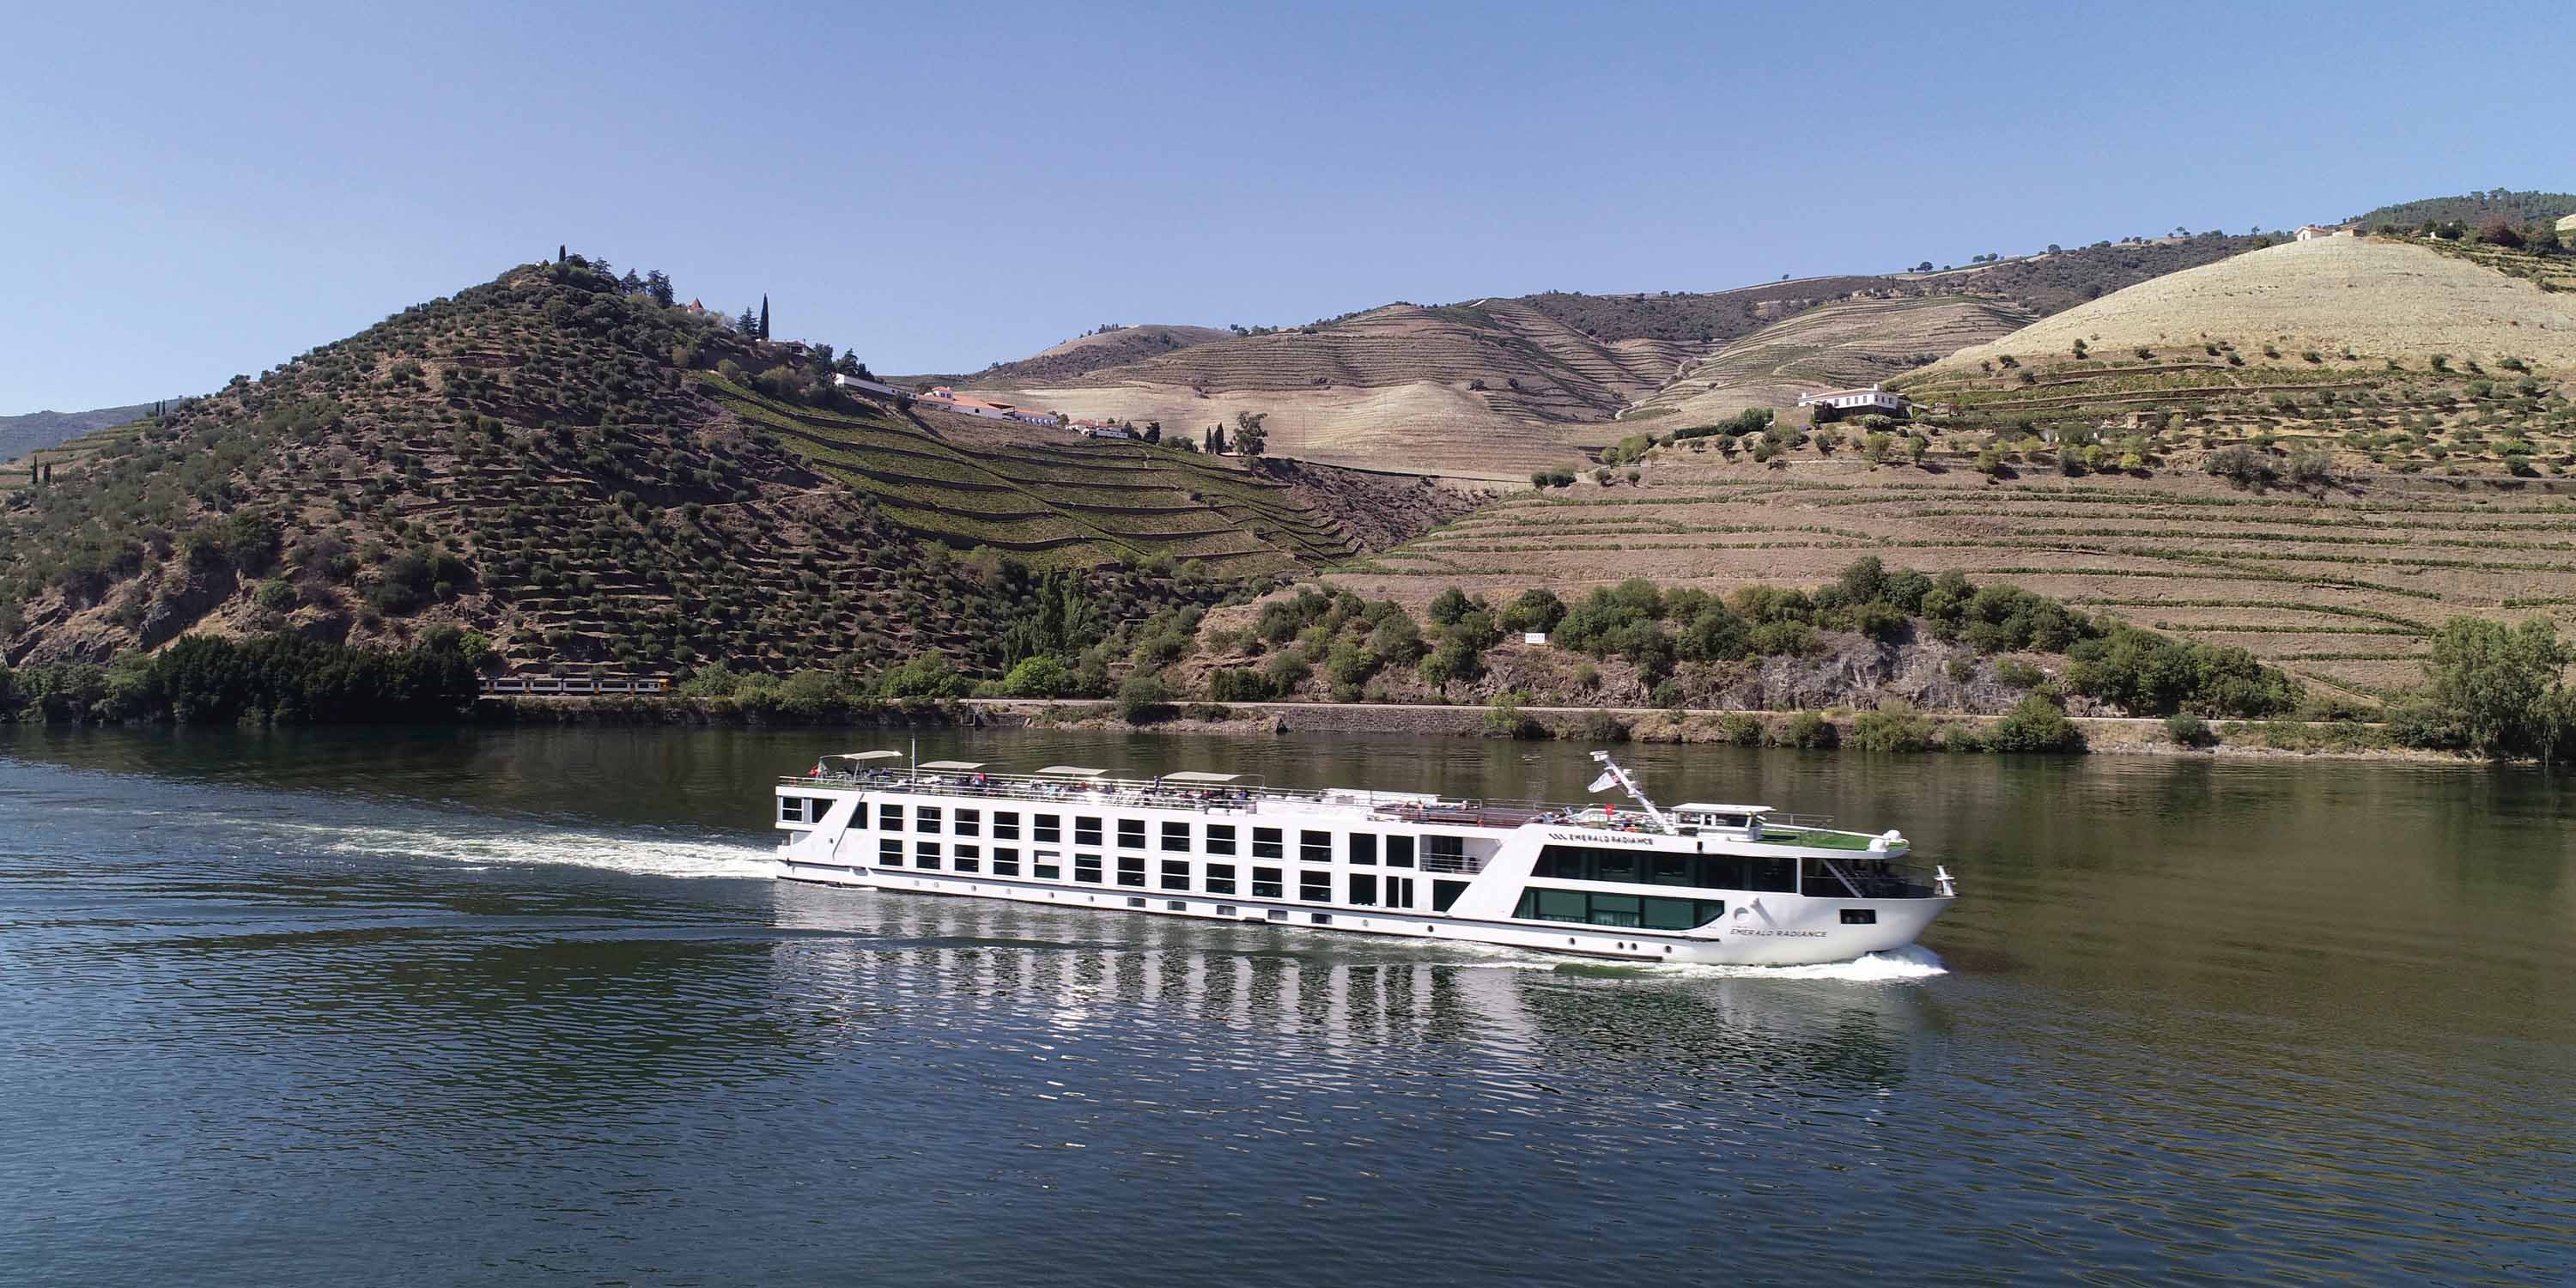 a river ship passing by on the river with hills behind it